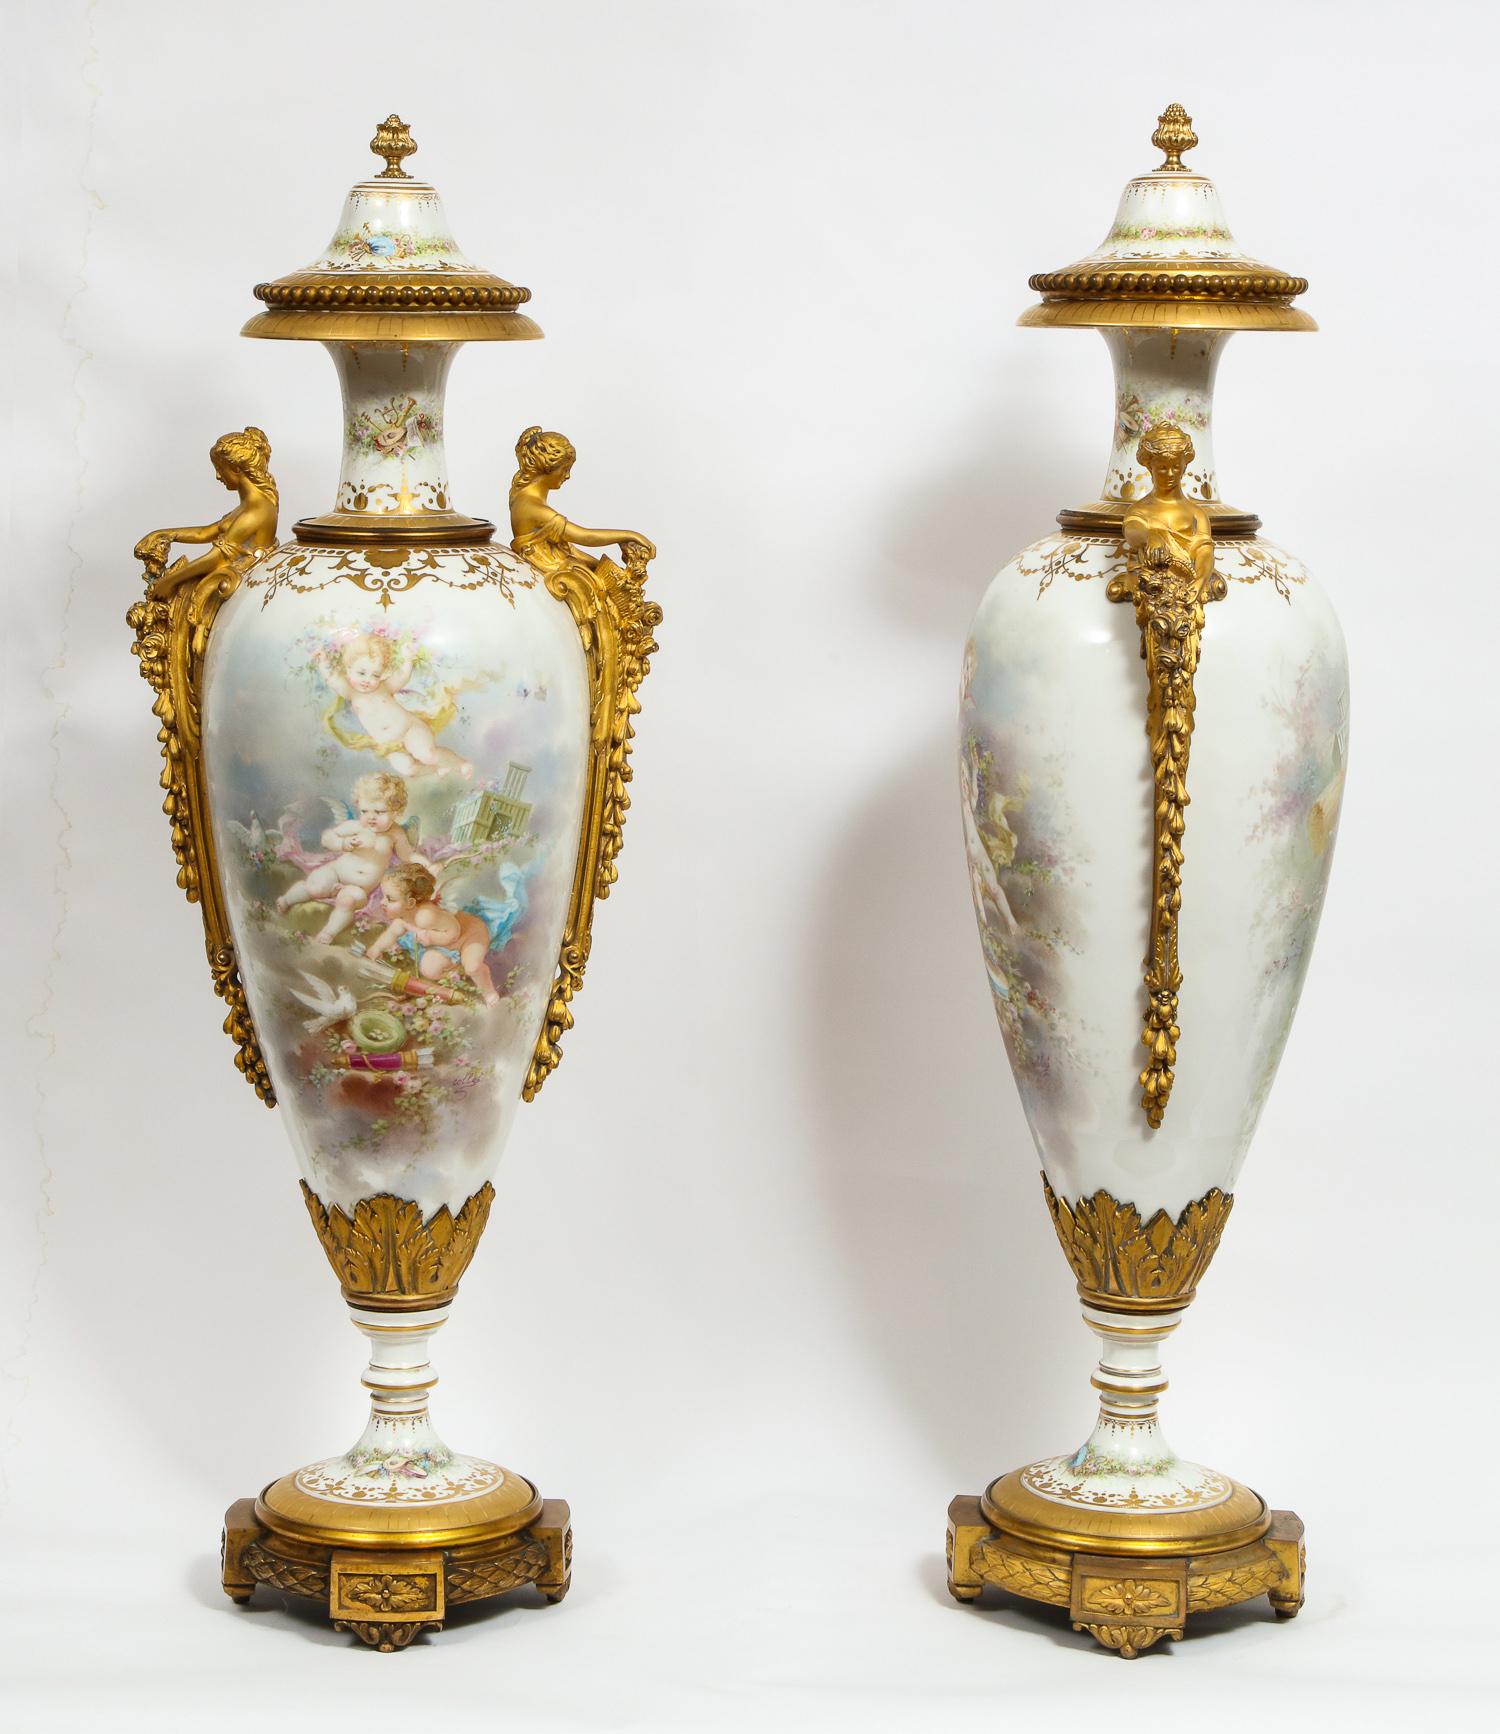 Monumental Pair of French Ormolu-Mounted White Sèvres Porcelain Vases and Covers 3